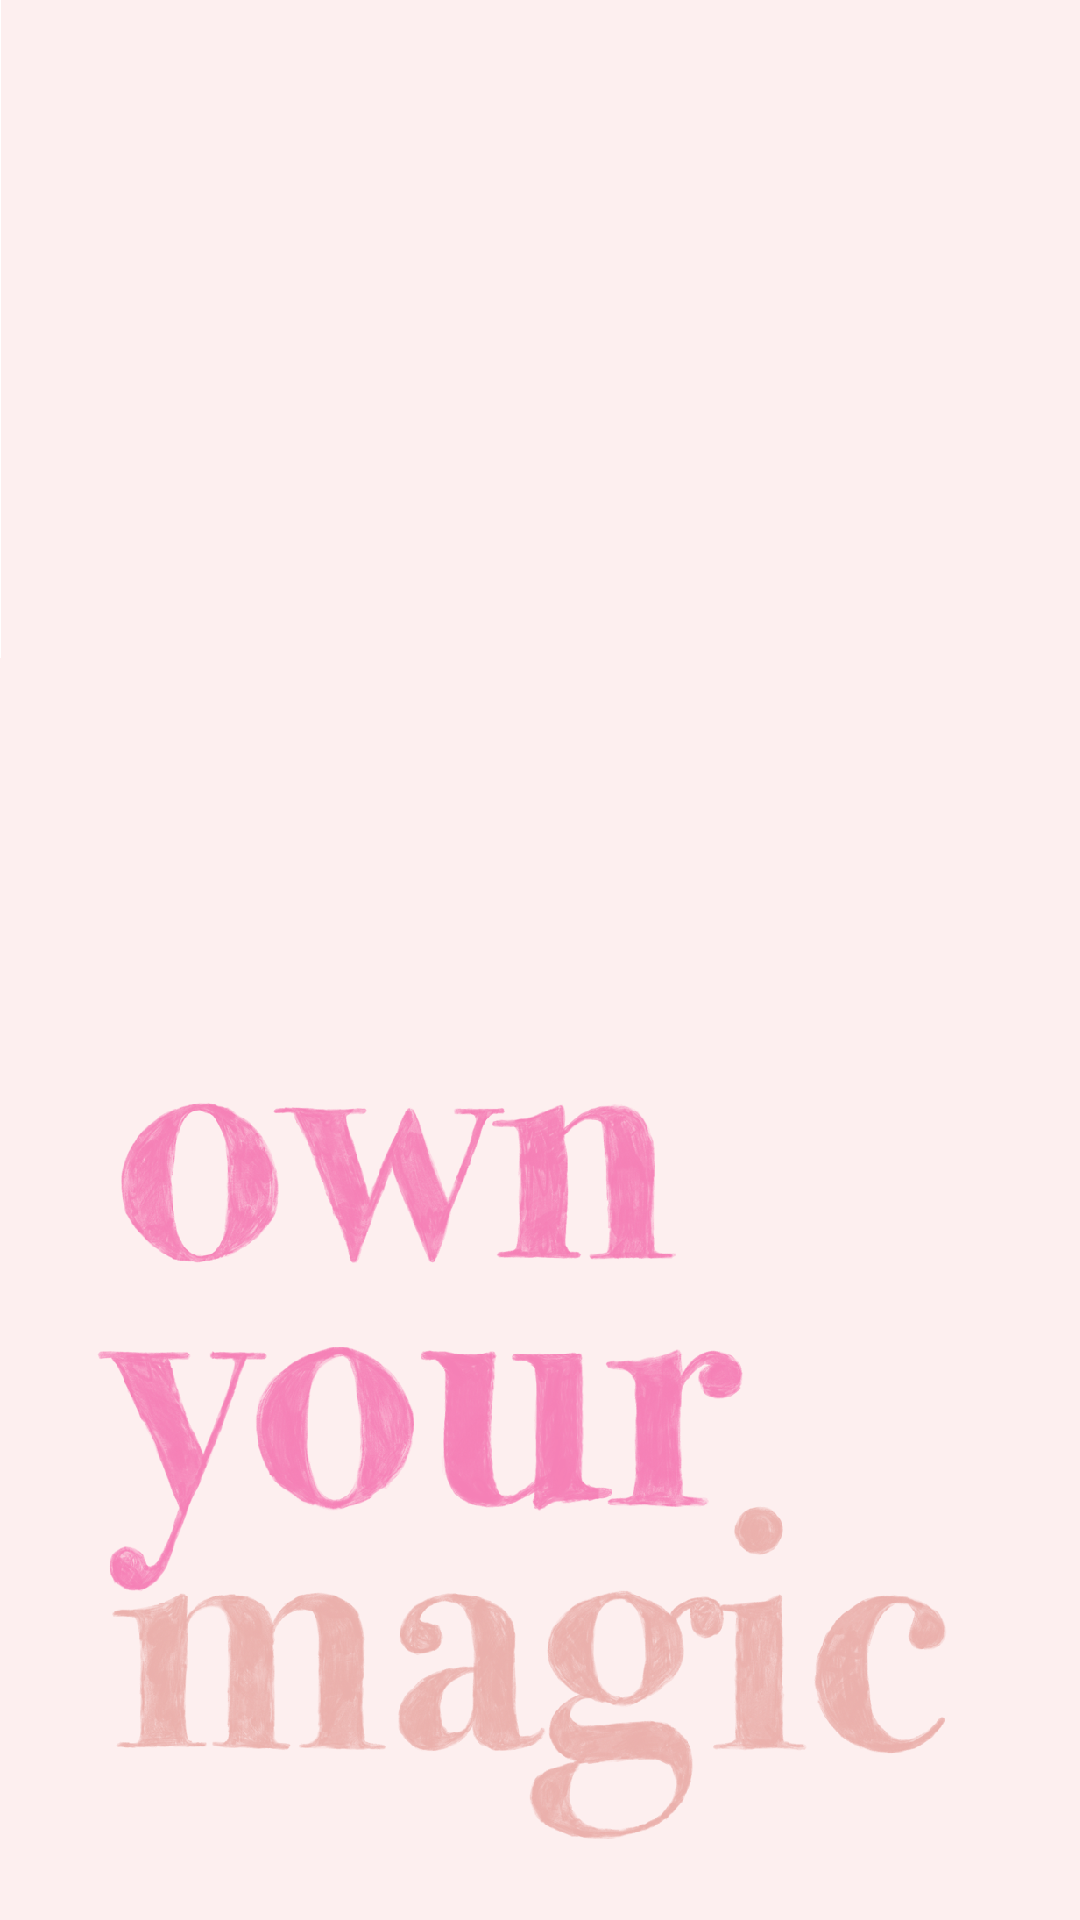 Self Love Wallpaper. Quotes & Thoughts. Inspirational